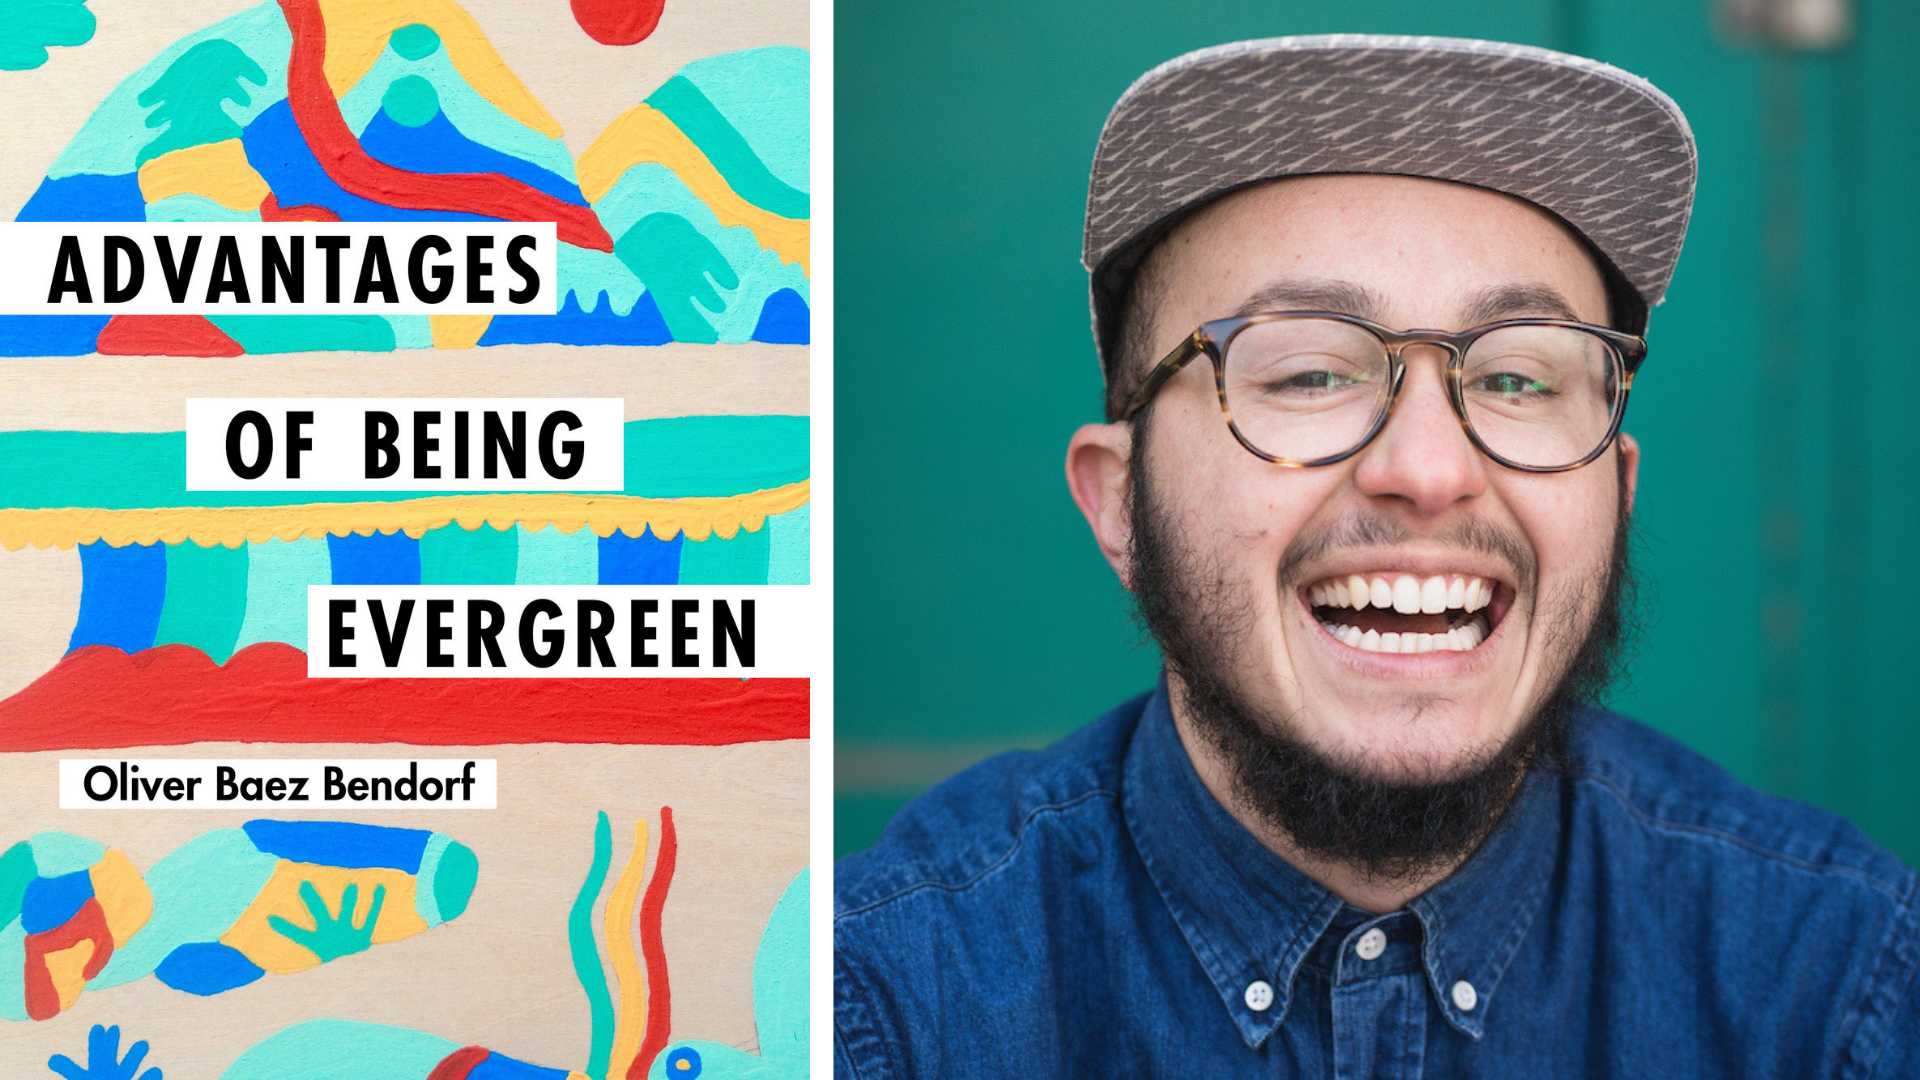 Advantages of Being Evergreen by Oliver Baez Bendorf